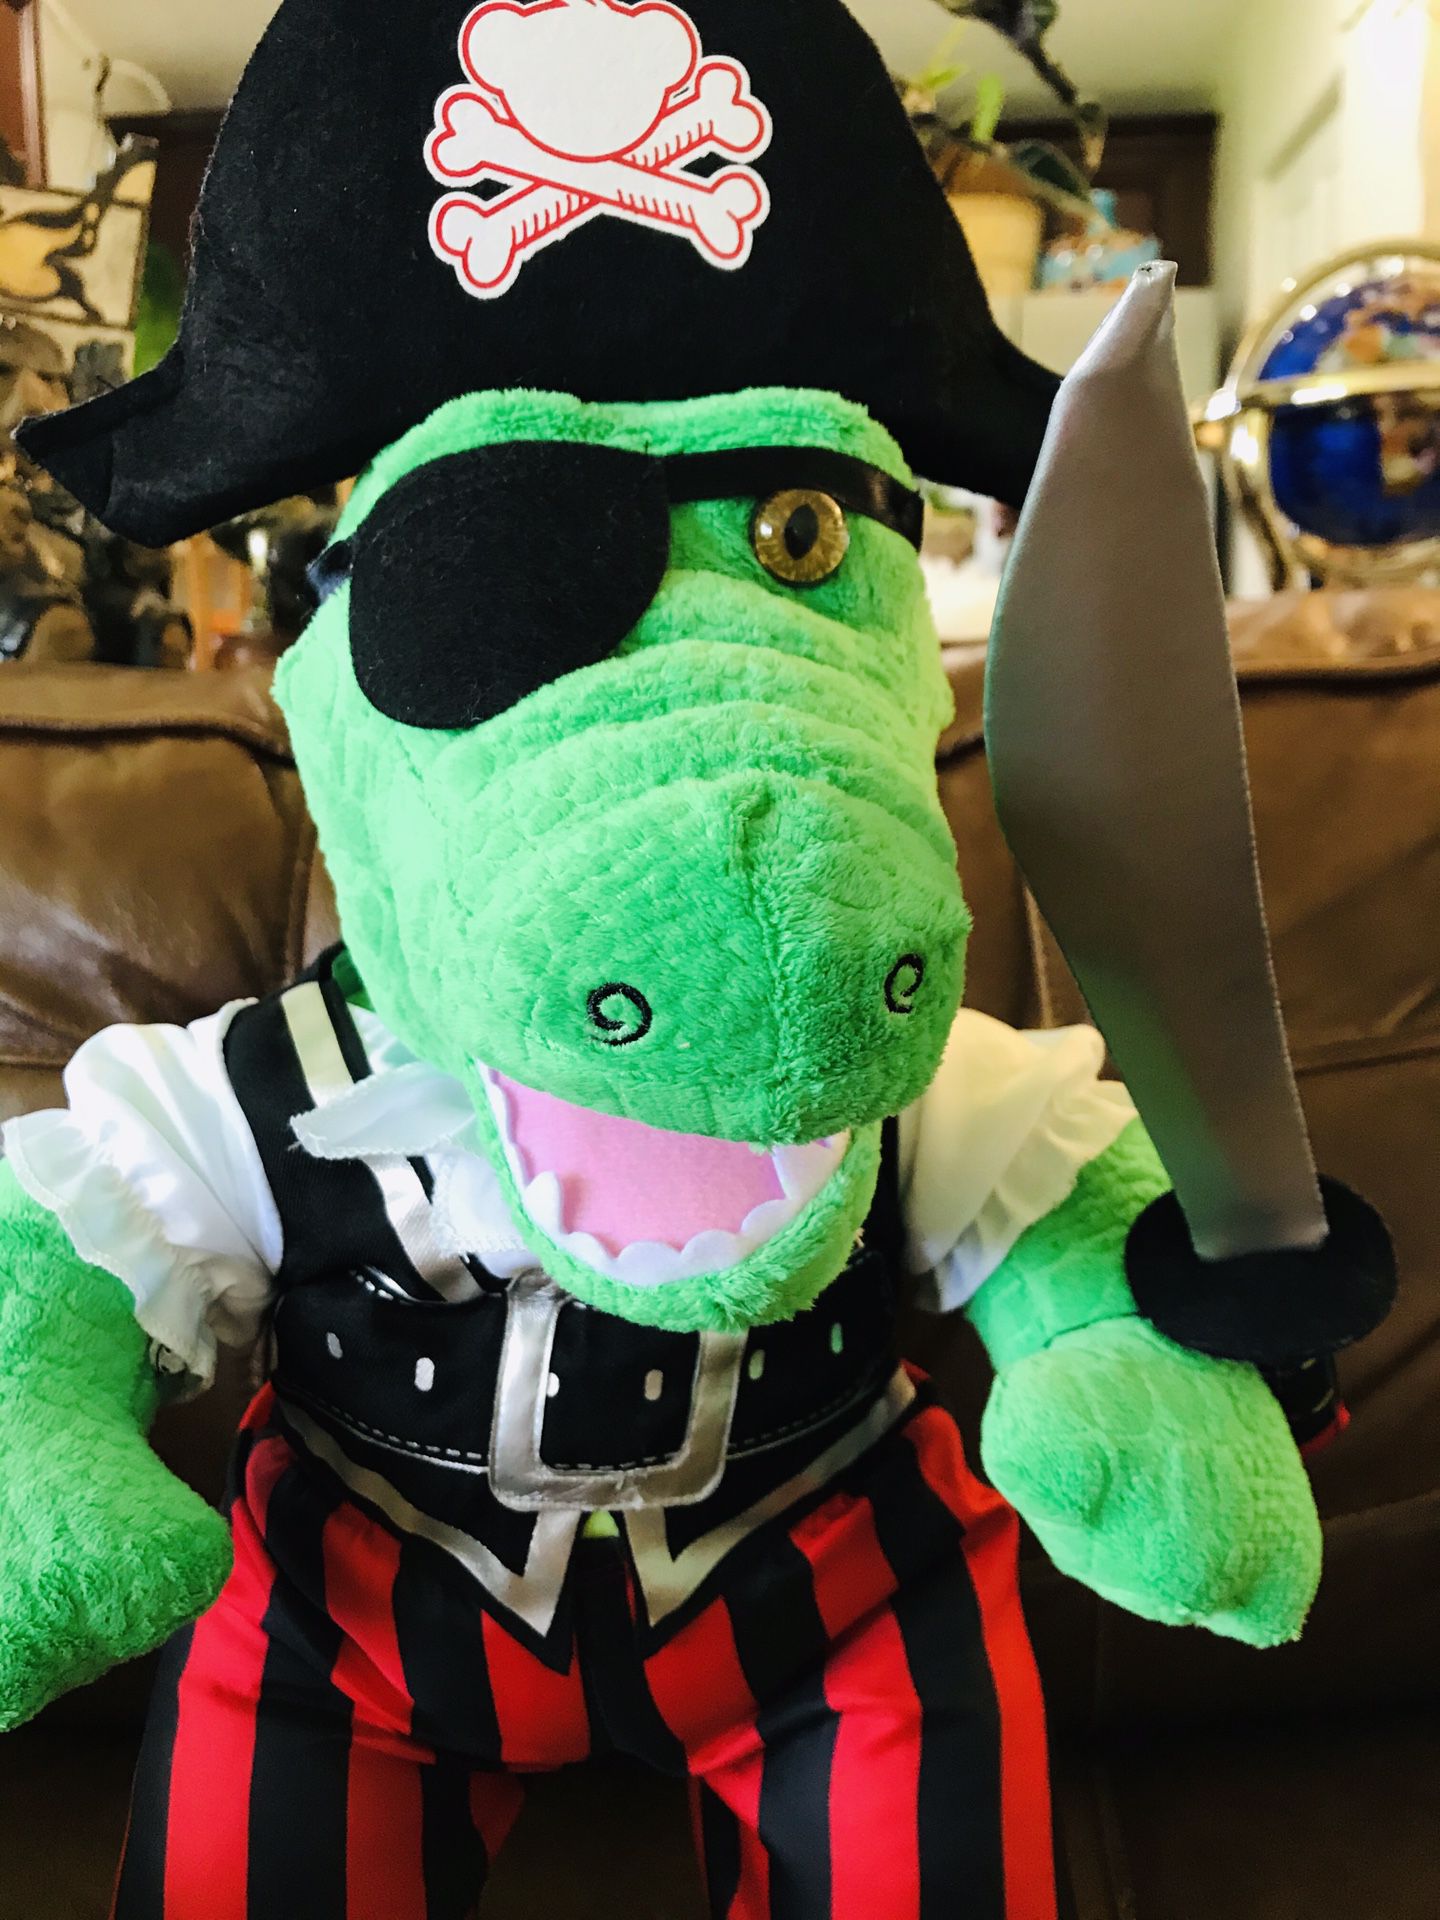 Build a bear workshop alligator Pirate Outfit clothes accessories included Like New! Soft toy stuffed animal or decor